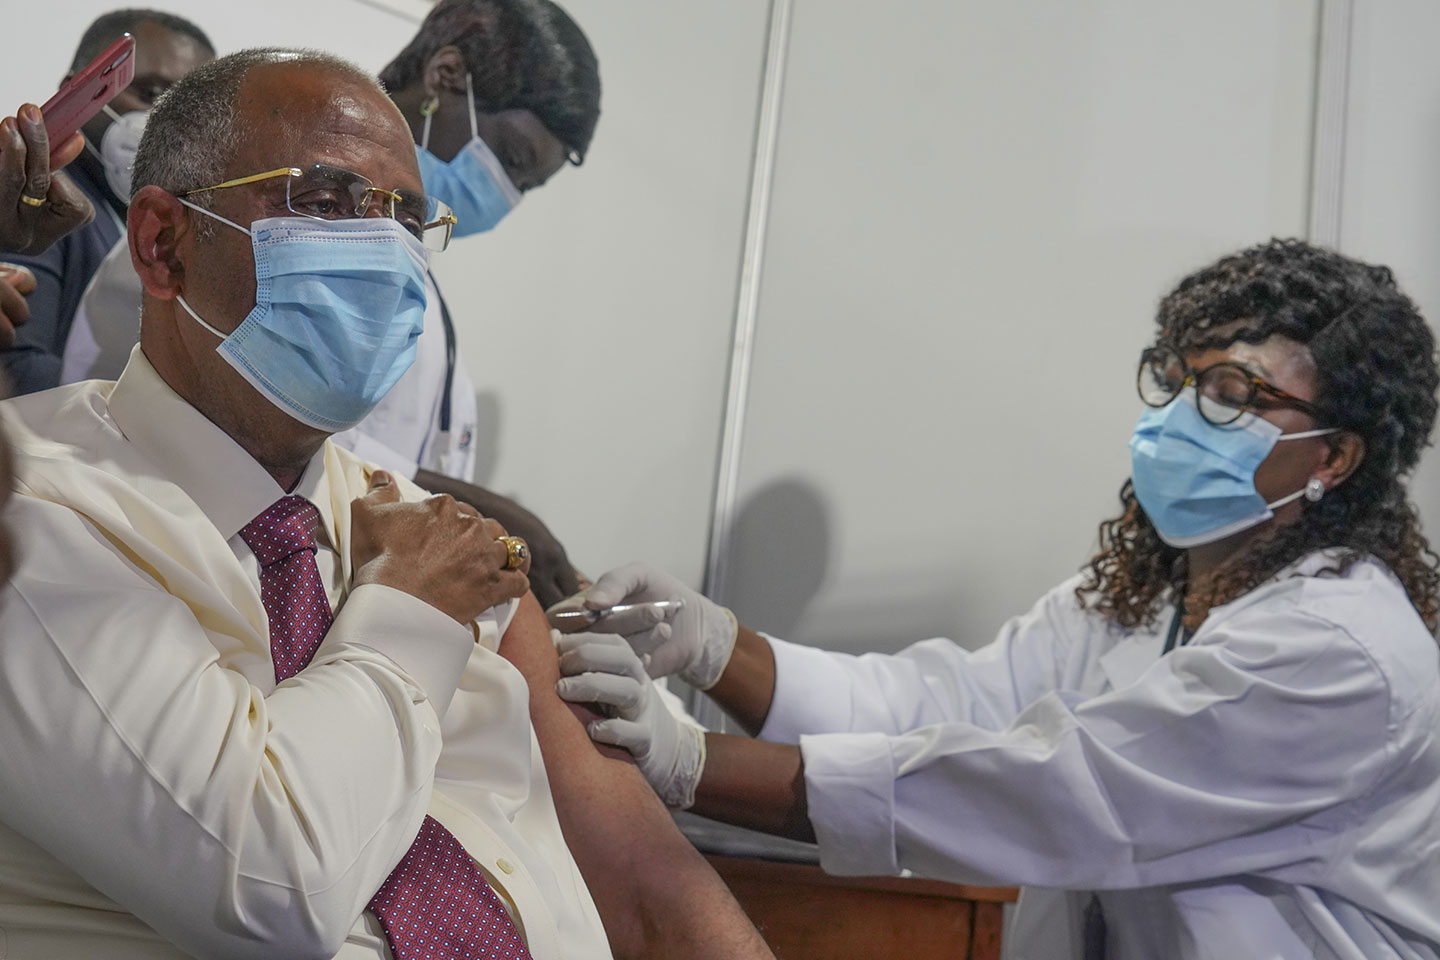 Setting an important example that the vaccine is safe and effective, Patrick Achi, Chief of Staff to the President of Côte d’Ivoire, becomes the first person to receive a COVAX vaccine at the launch of the nation’s COVID-19 vaccination campaign at the Abidjan Parc des Sports. Gavi/2021